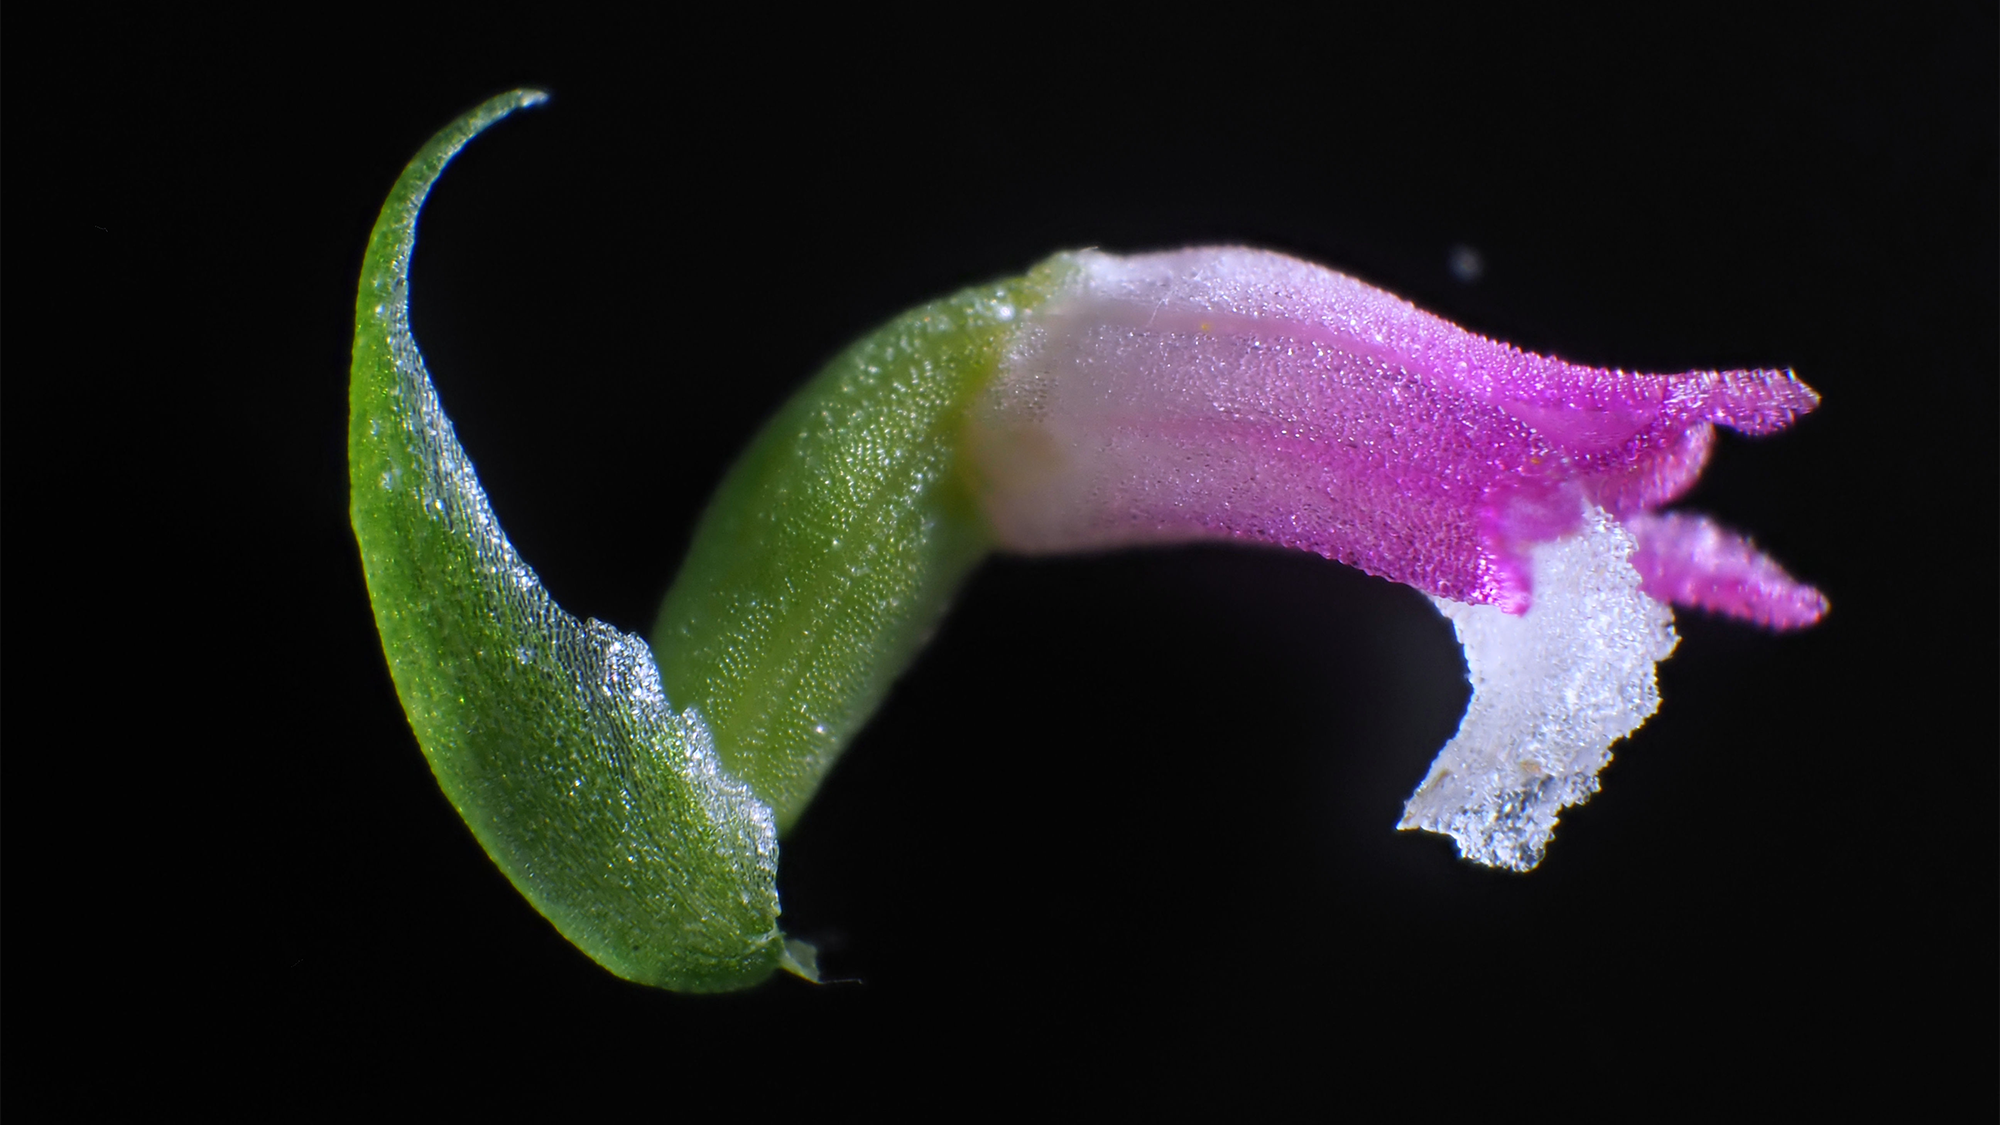 This new species of pink orchid appears like delicate glasswork